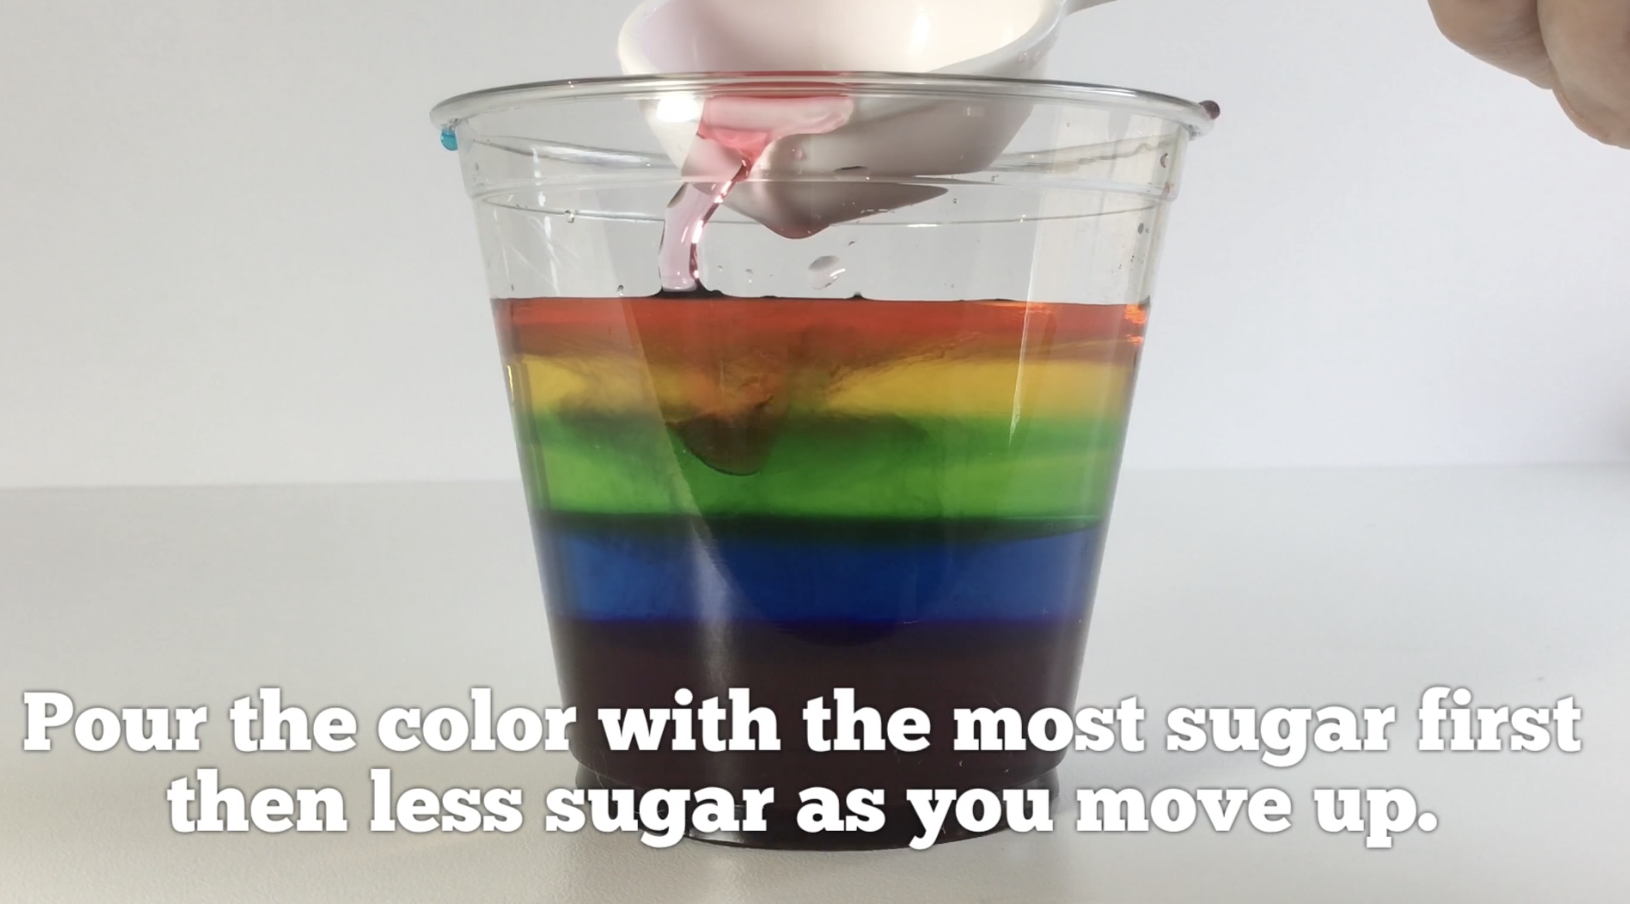 How To Make Your Very Own Rainbow In a Cup